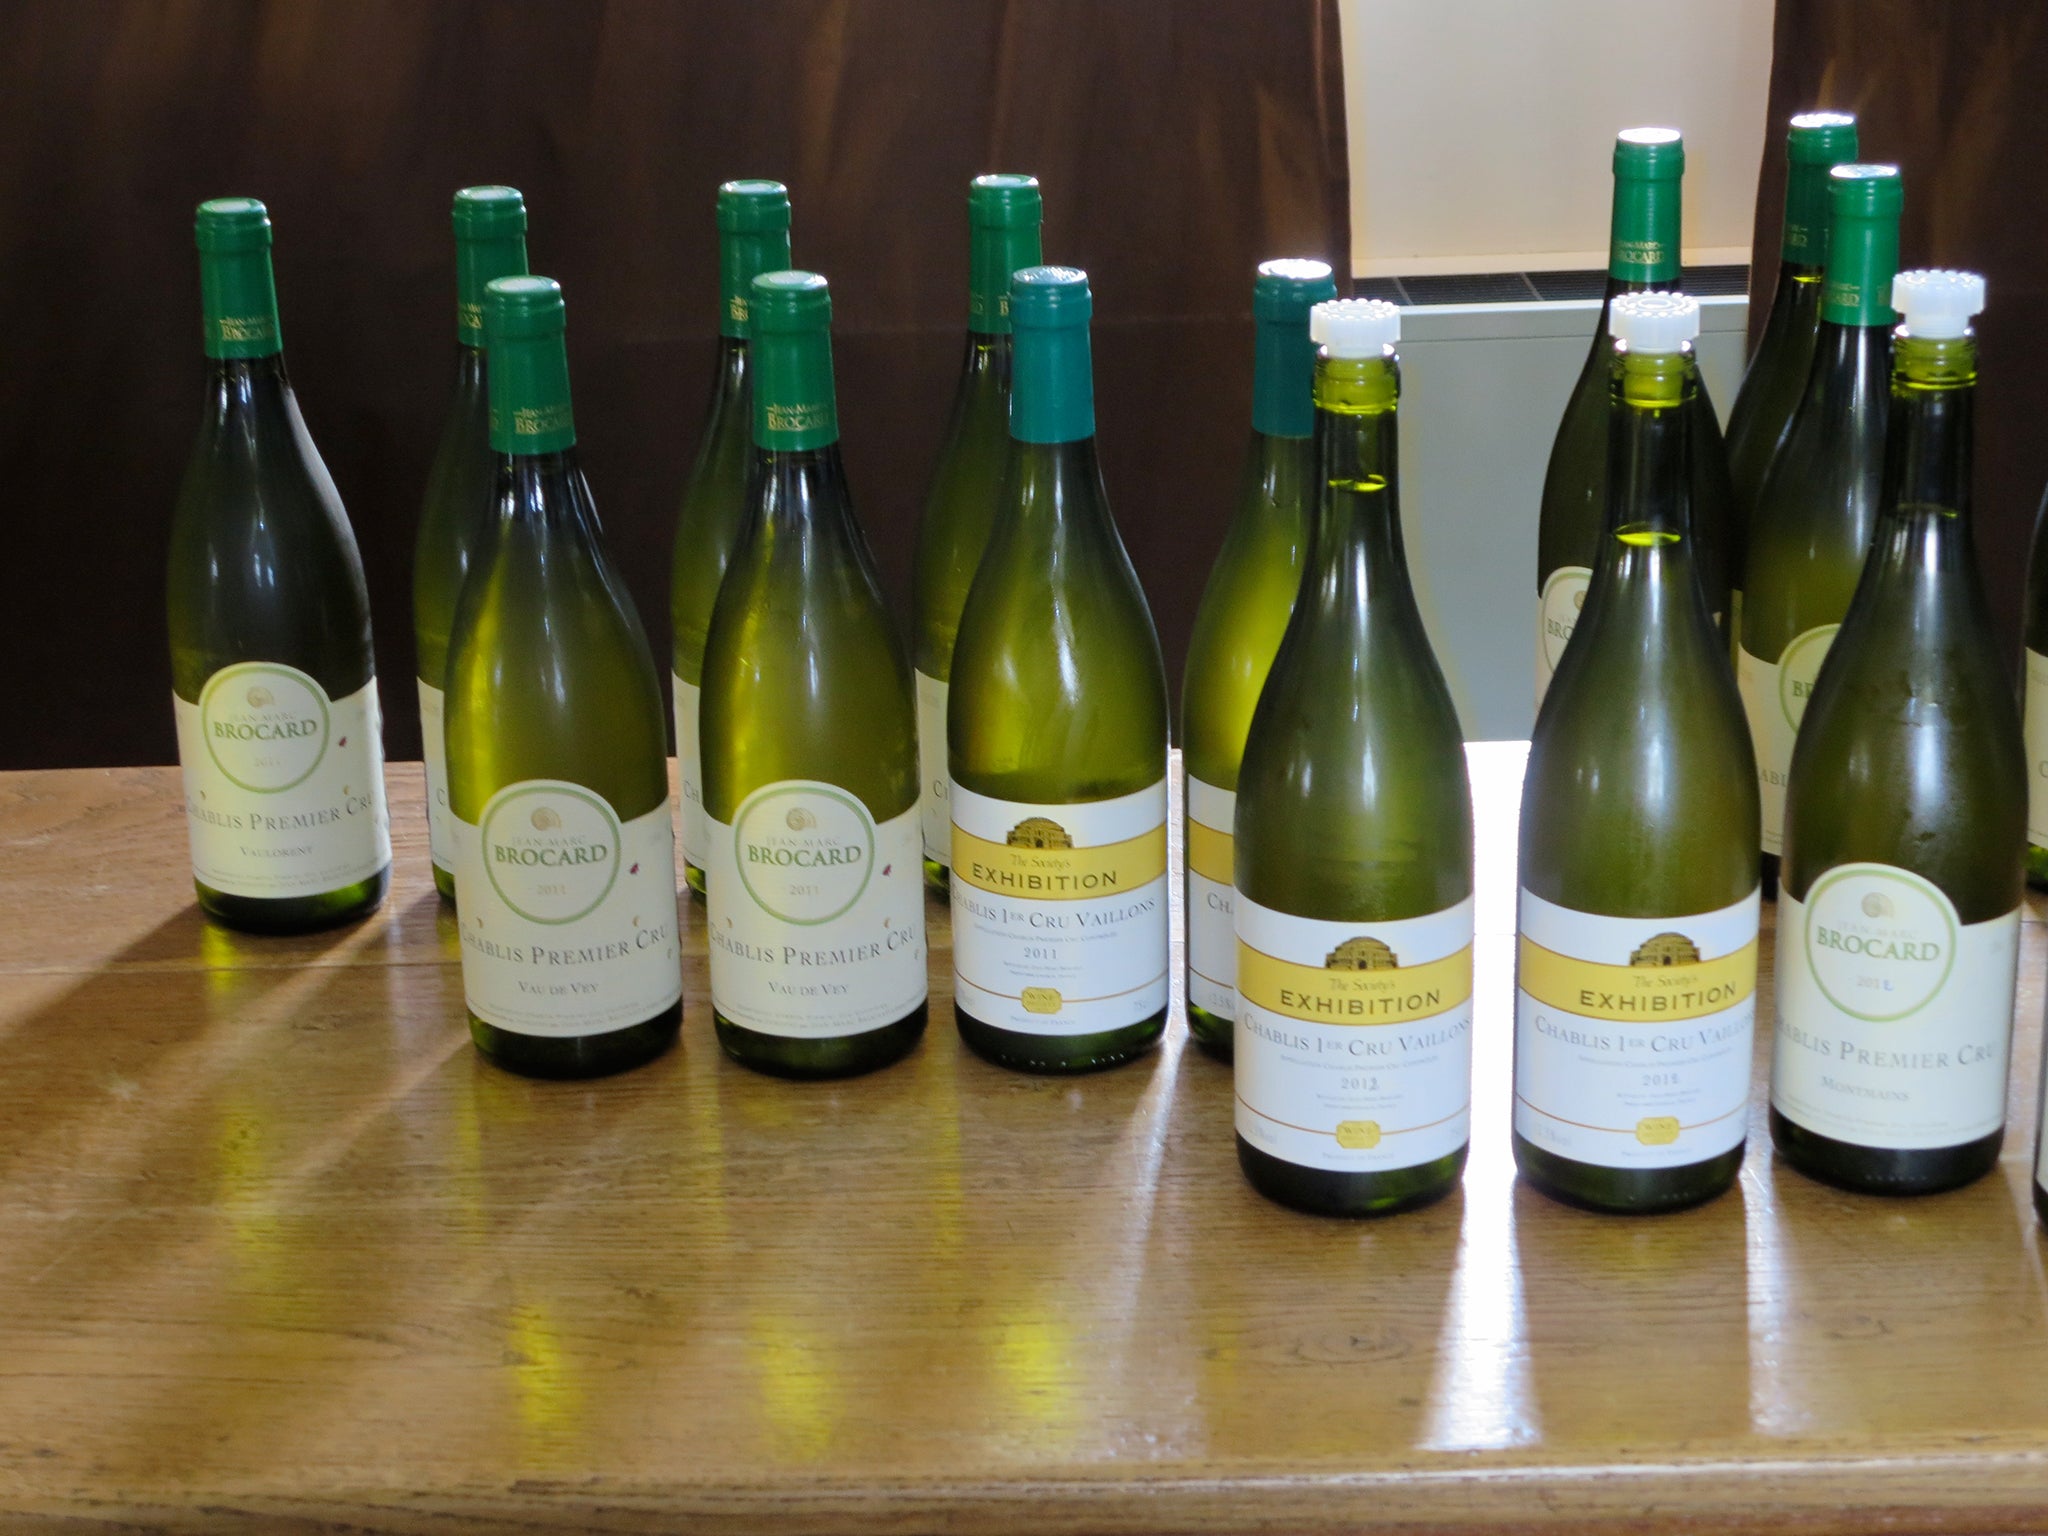 Chablis from the Brocard vineyard has been raided four times in 2015